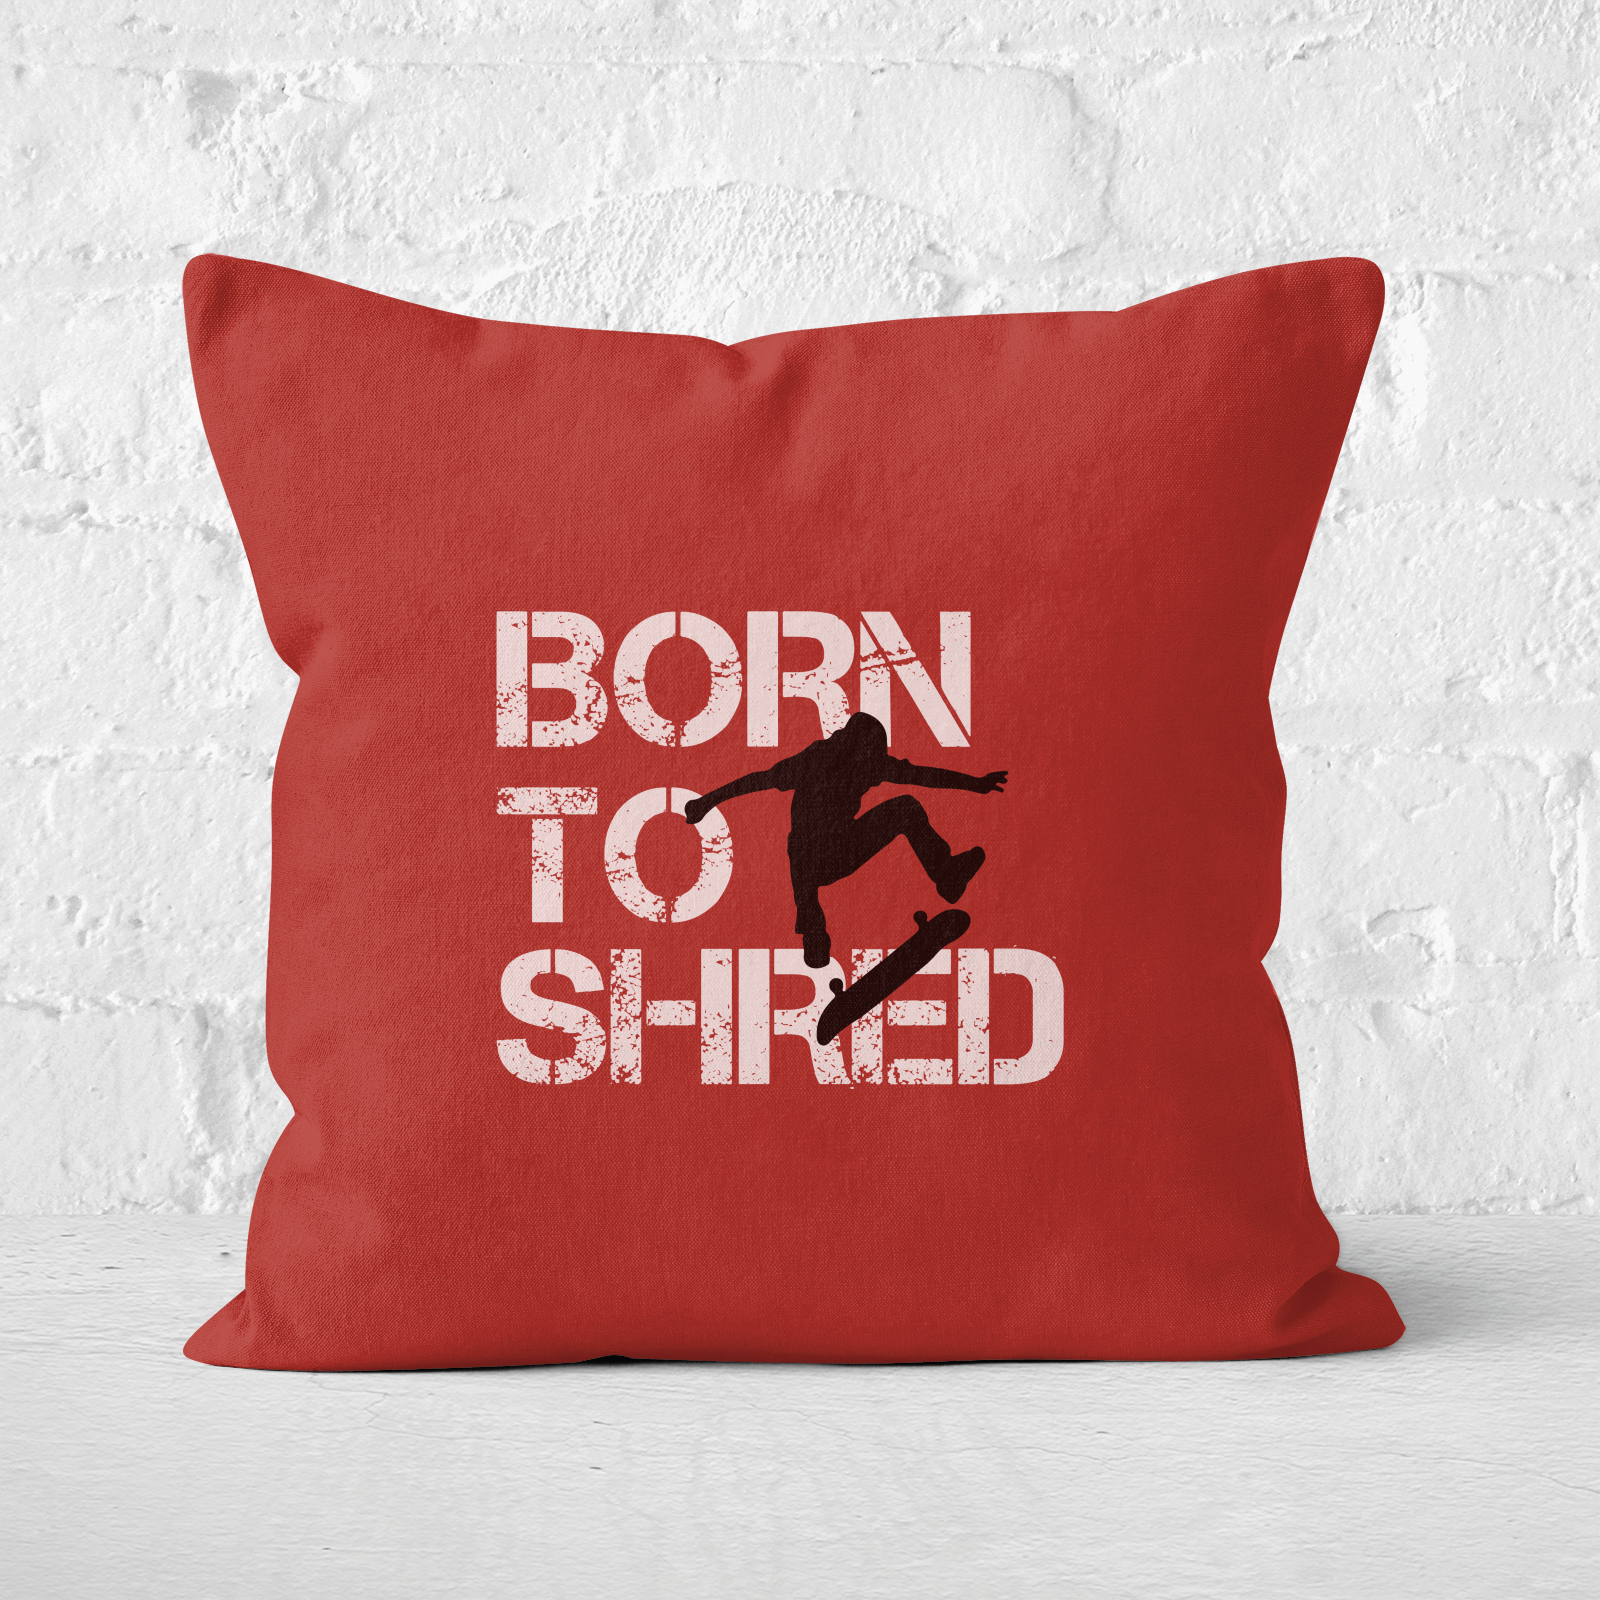 Born To Shred Square Cushion - 60x60cm - Soft Touch